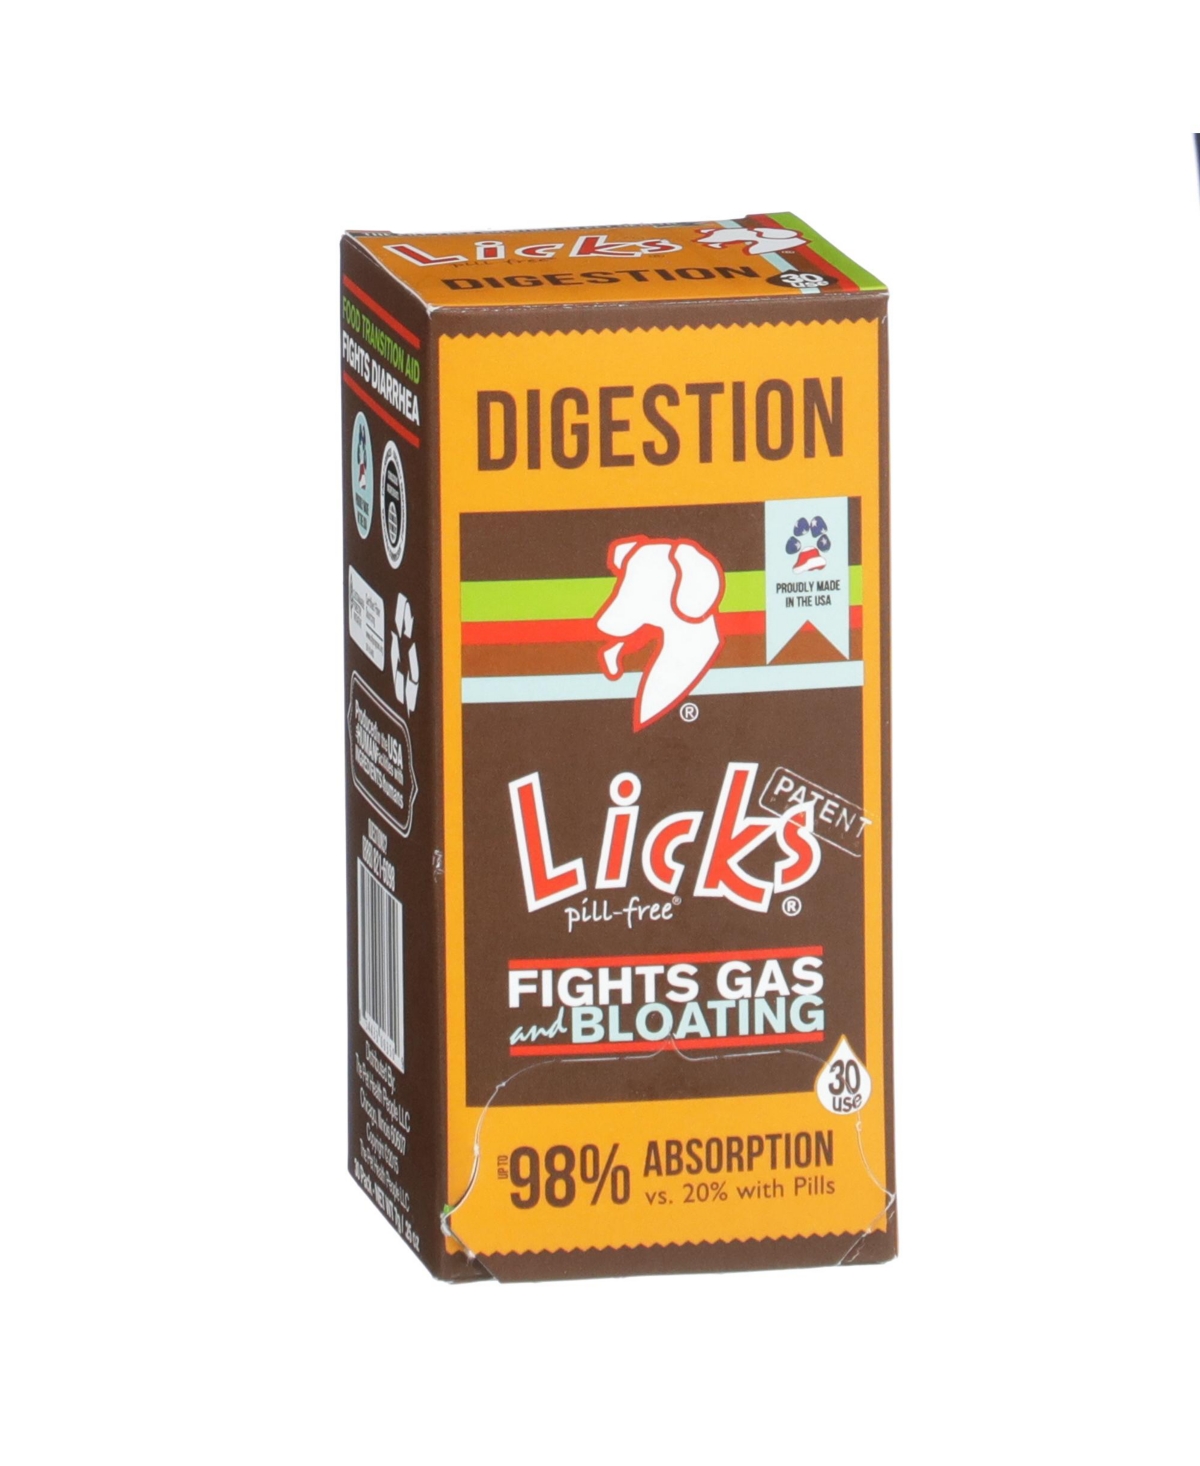 Licks Pill-Free Dog Digestion - Dog Gut Health and Gas Relief - Bloating Relief and Digestion Supplement for Dogs - Dog Health Supplies - Gel Packets